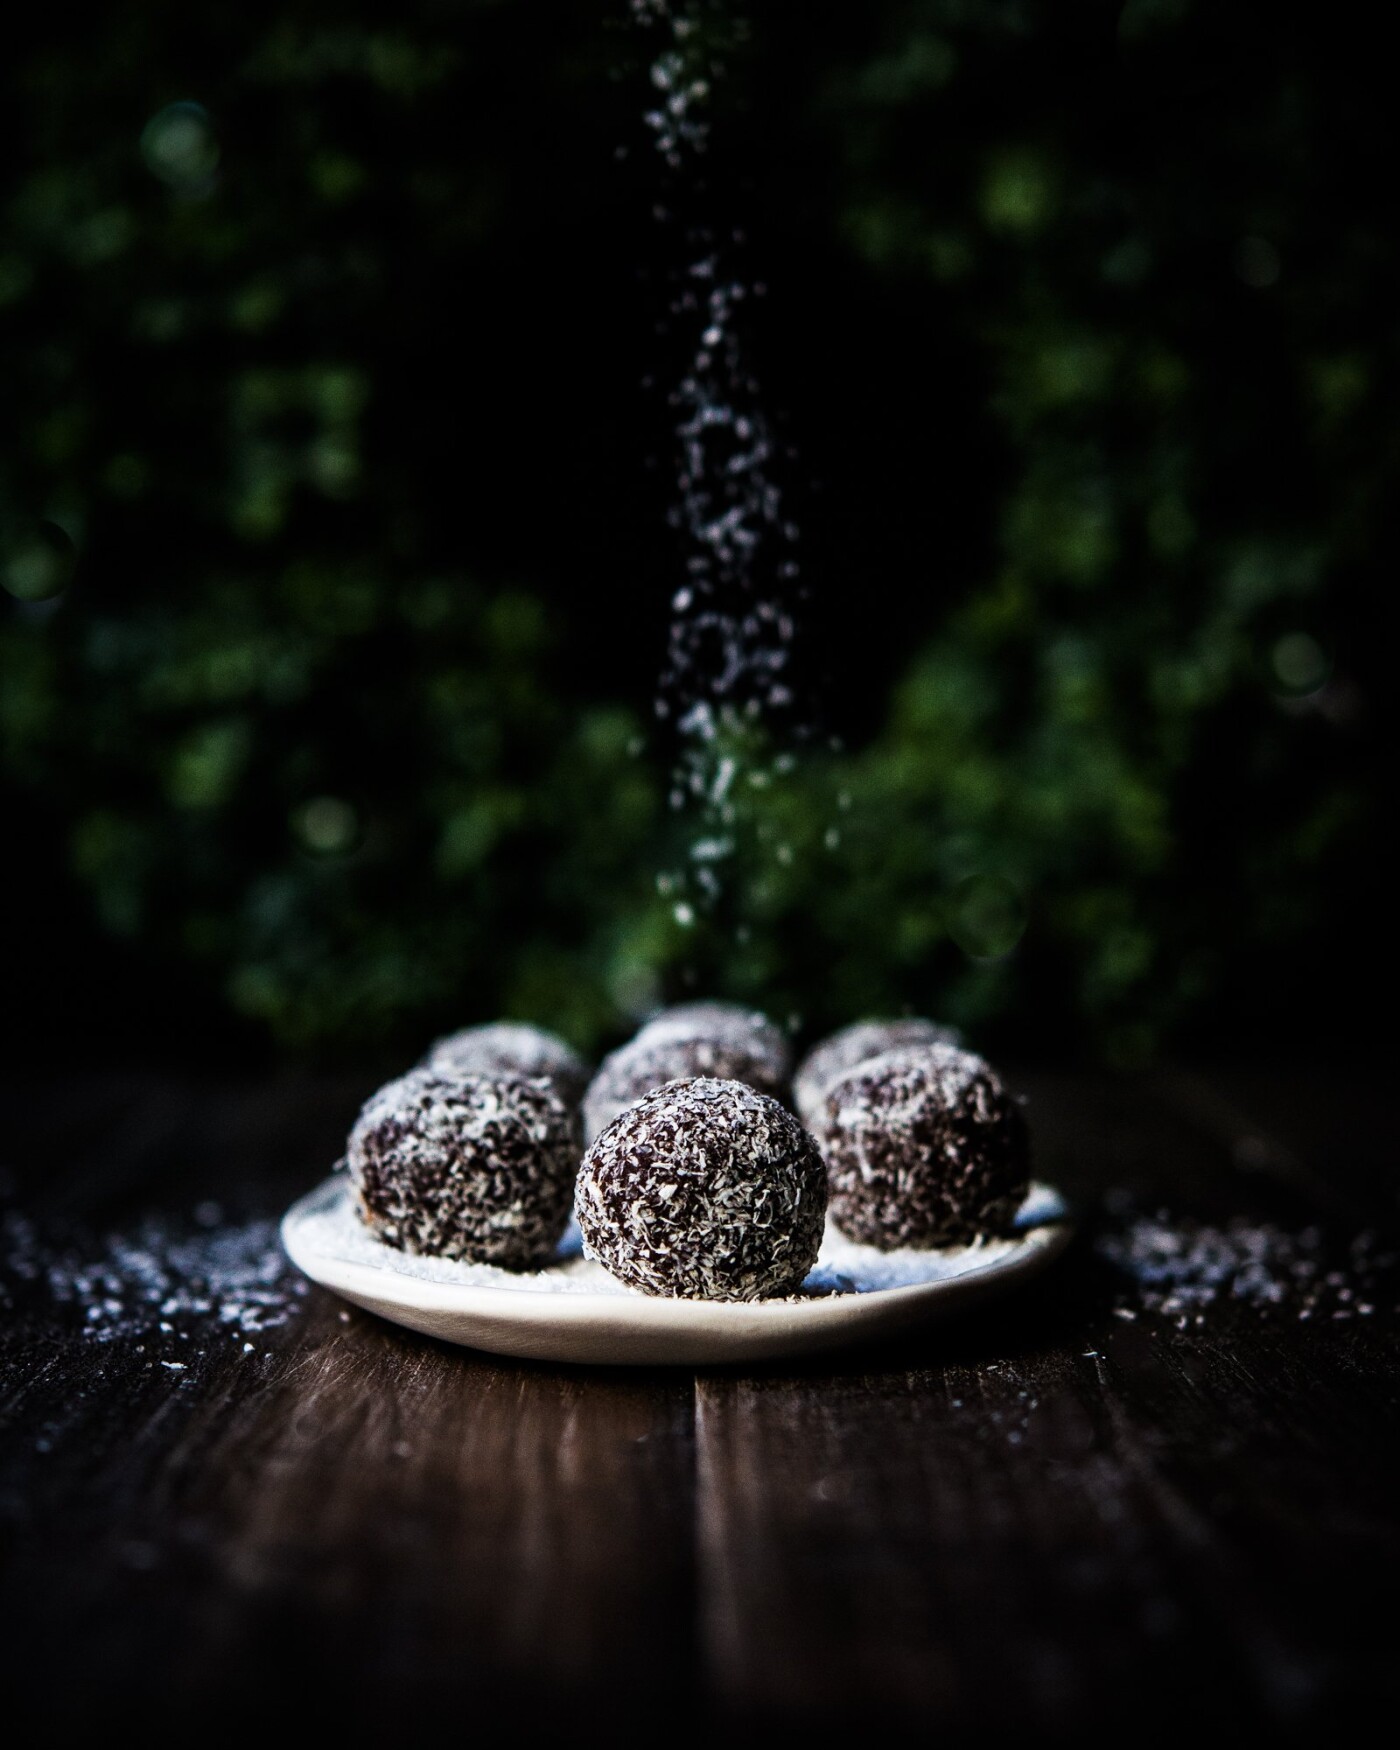 I wanted to capture the motion of falling snow by sprinkling fine coconut shreds onto this plateful of chocolaty ginger garam masala balls infused with rum.   It is wonderful to introduce this holiday spirit on my table.